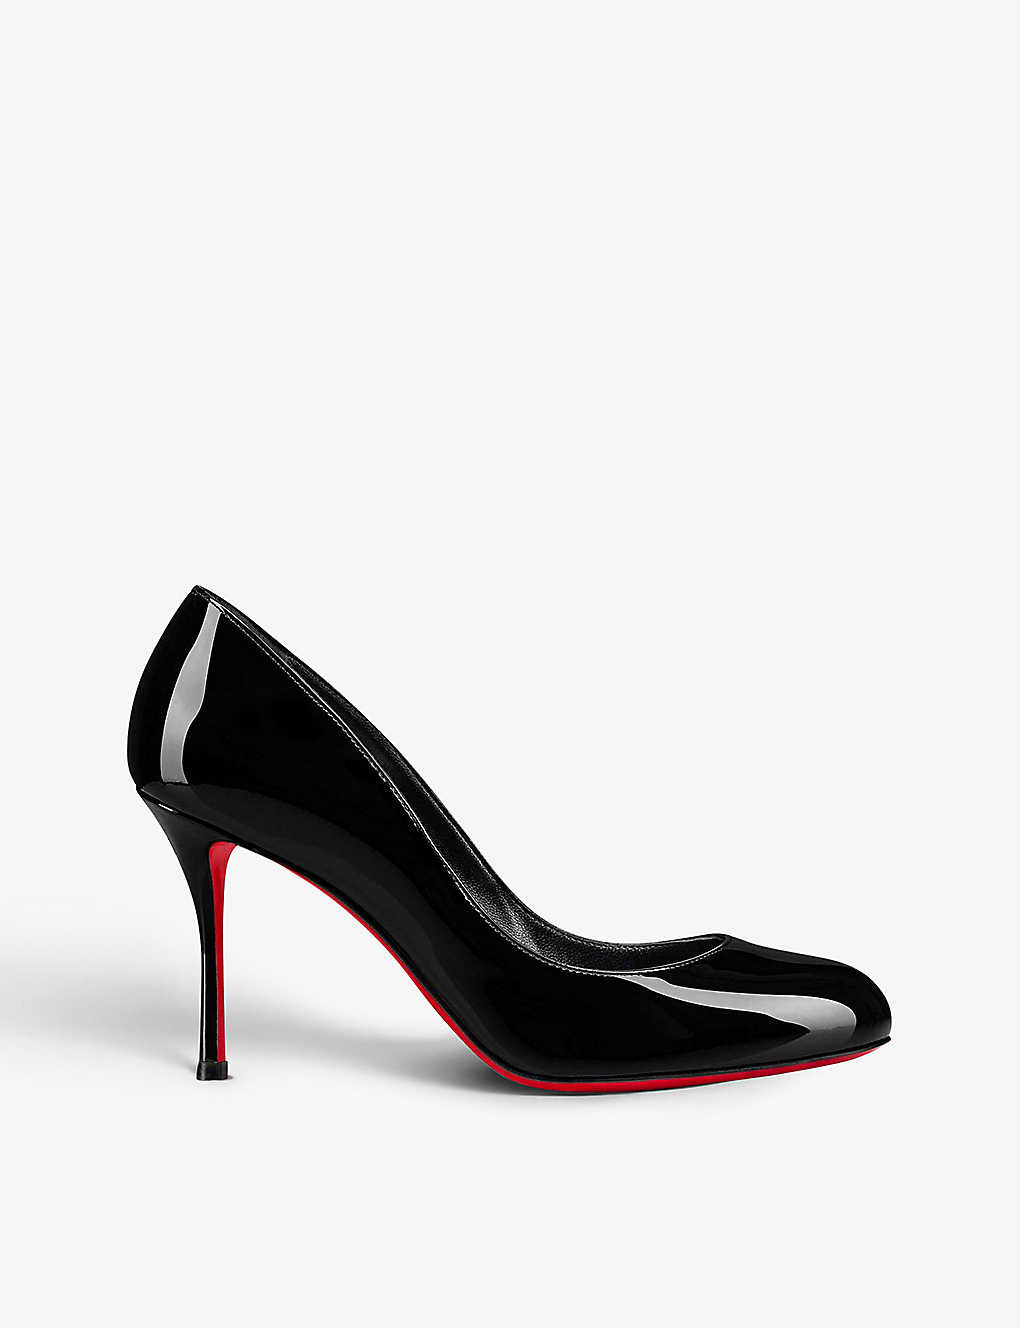 Christian Louboutin Dolly 85 Patent-leather Courts In Black/lin Black